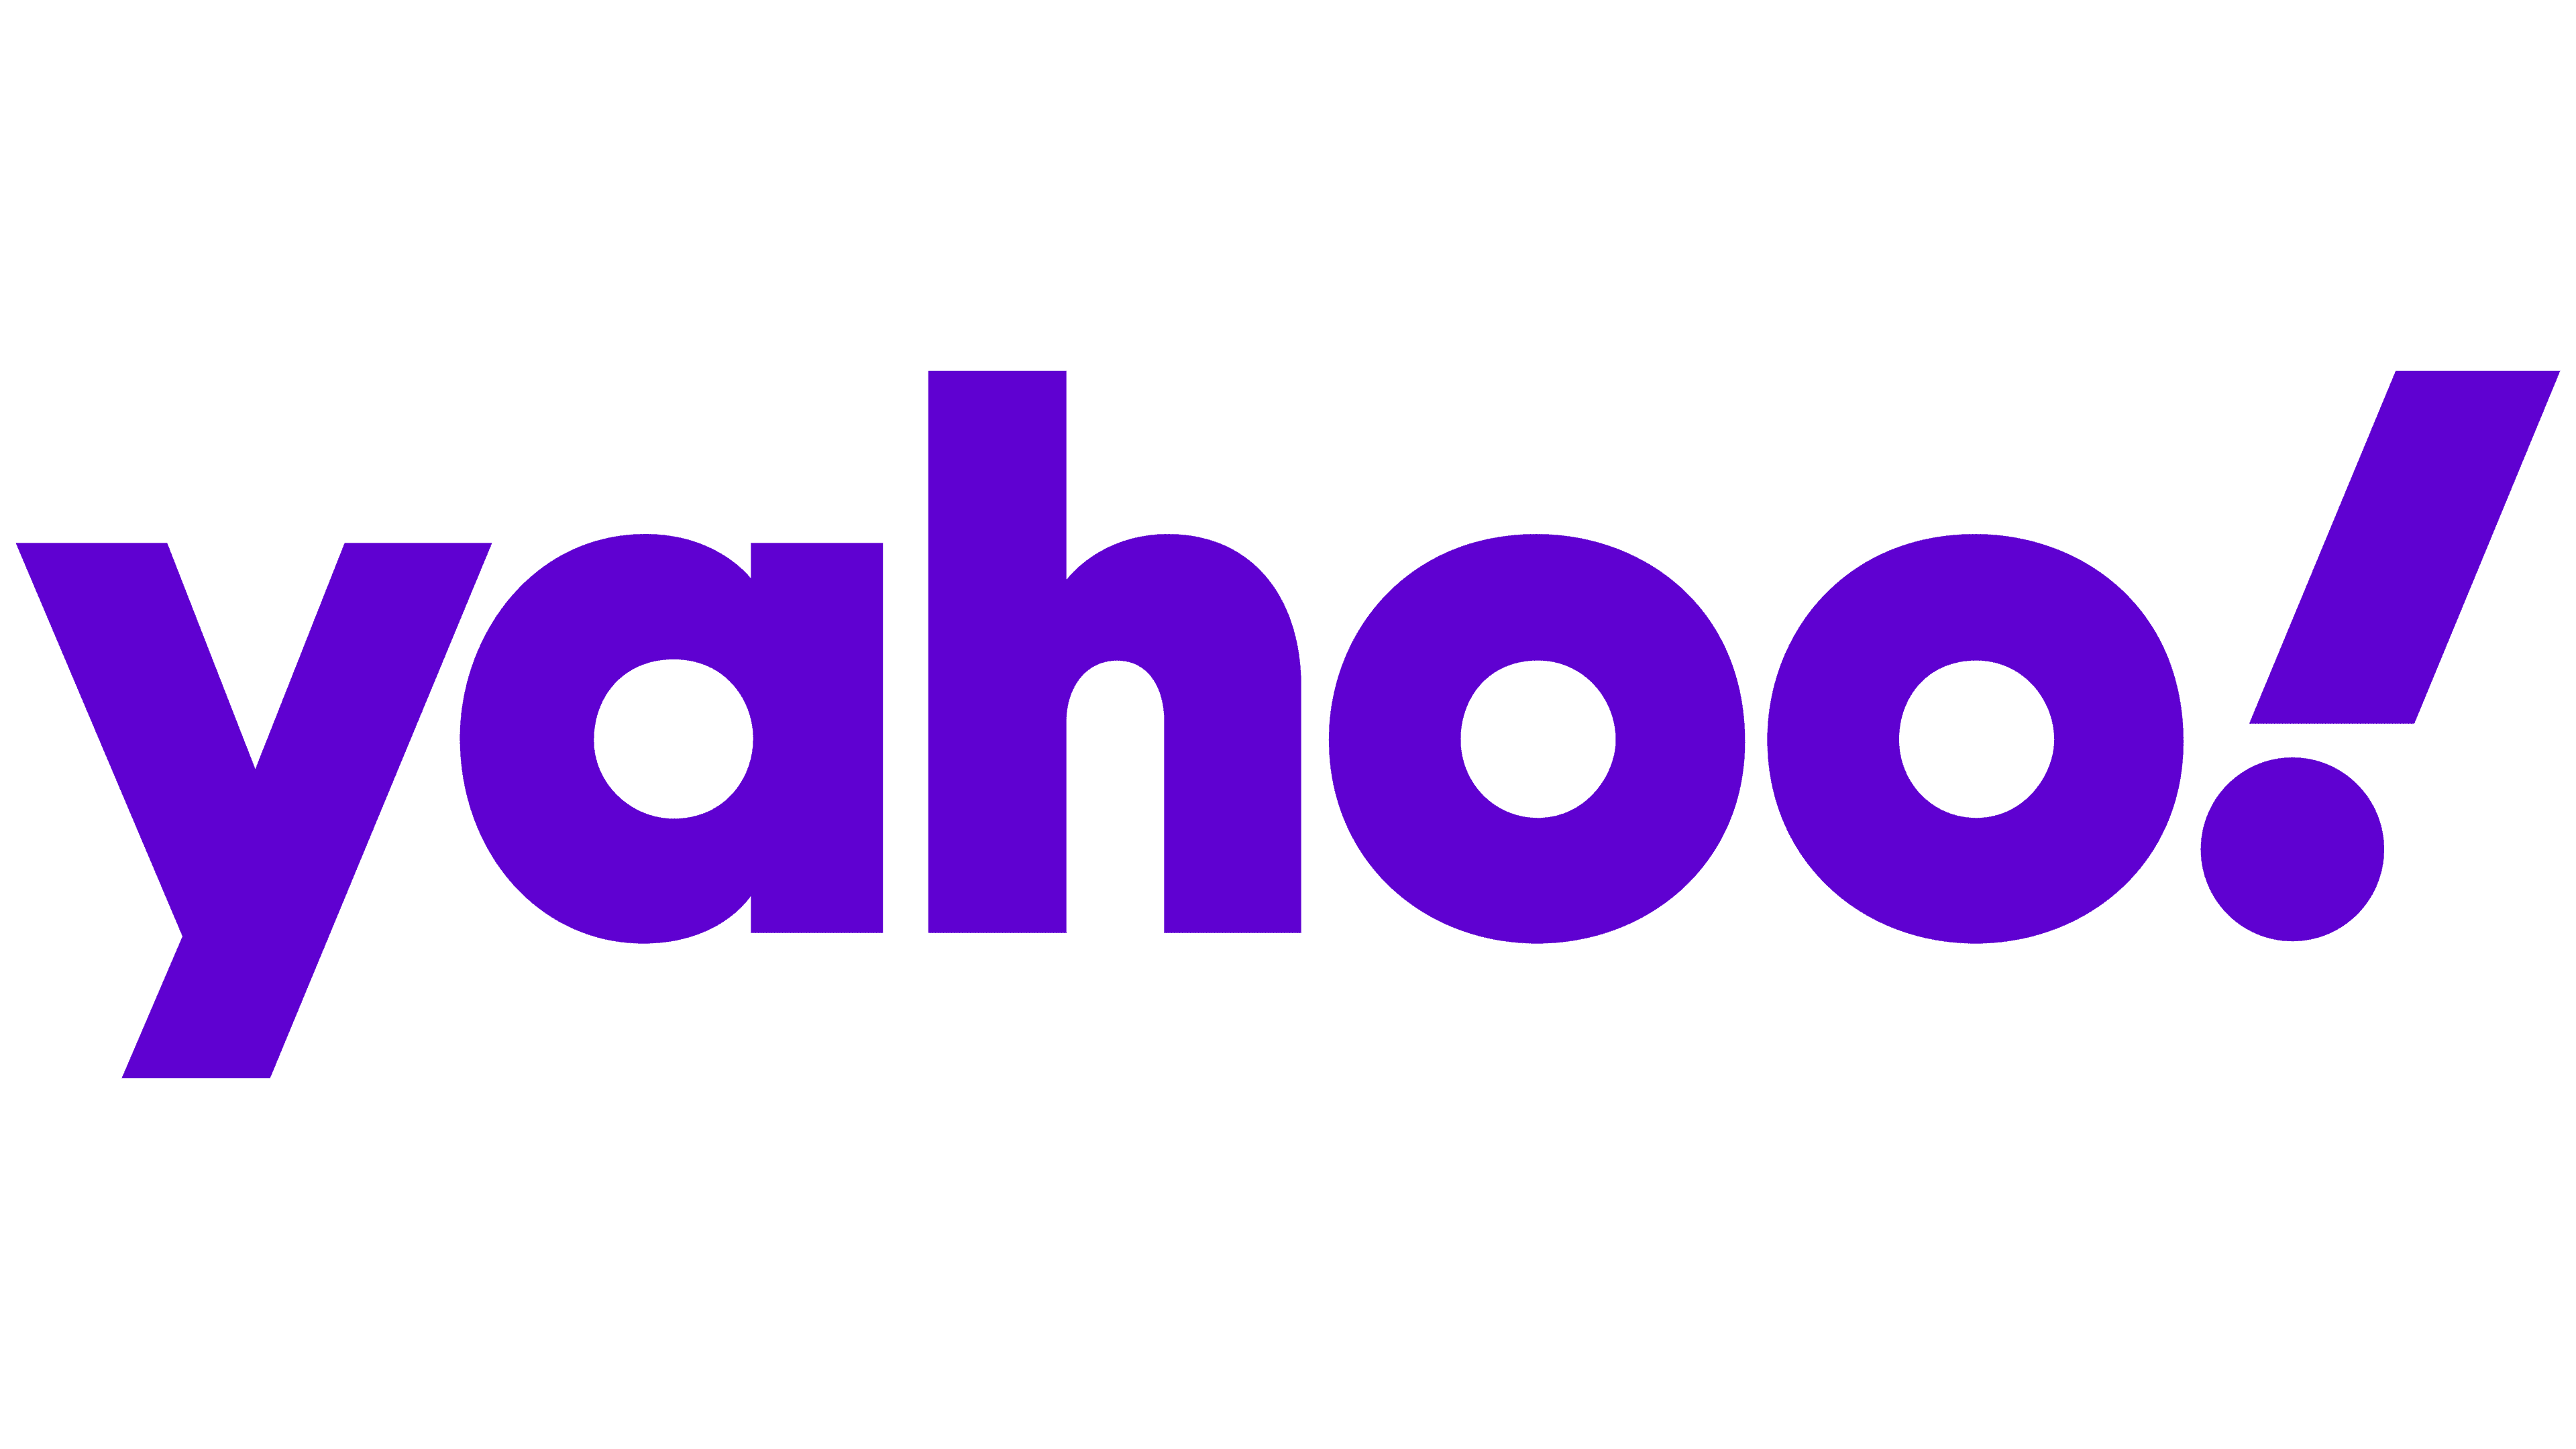 Yahoo! logo article on how to go grey featuring TO112